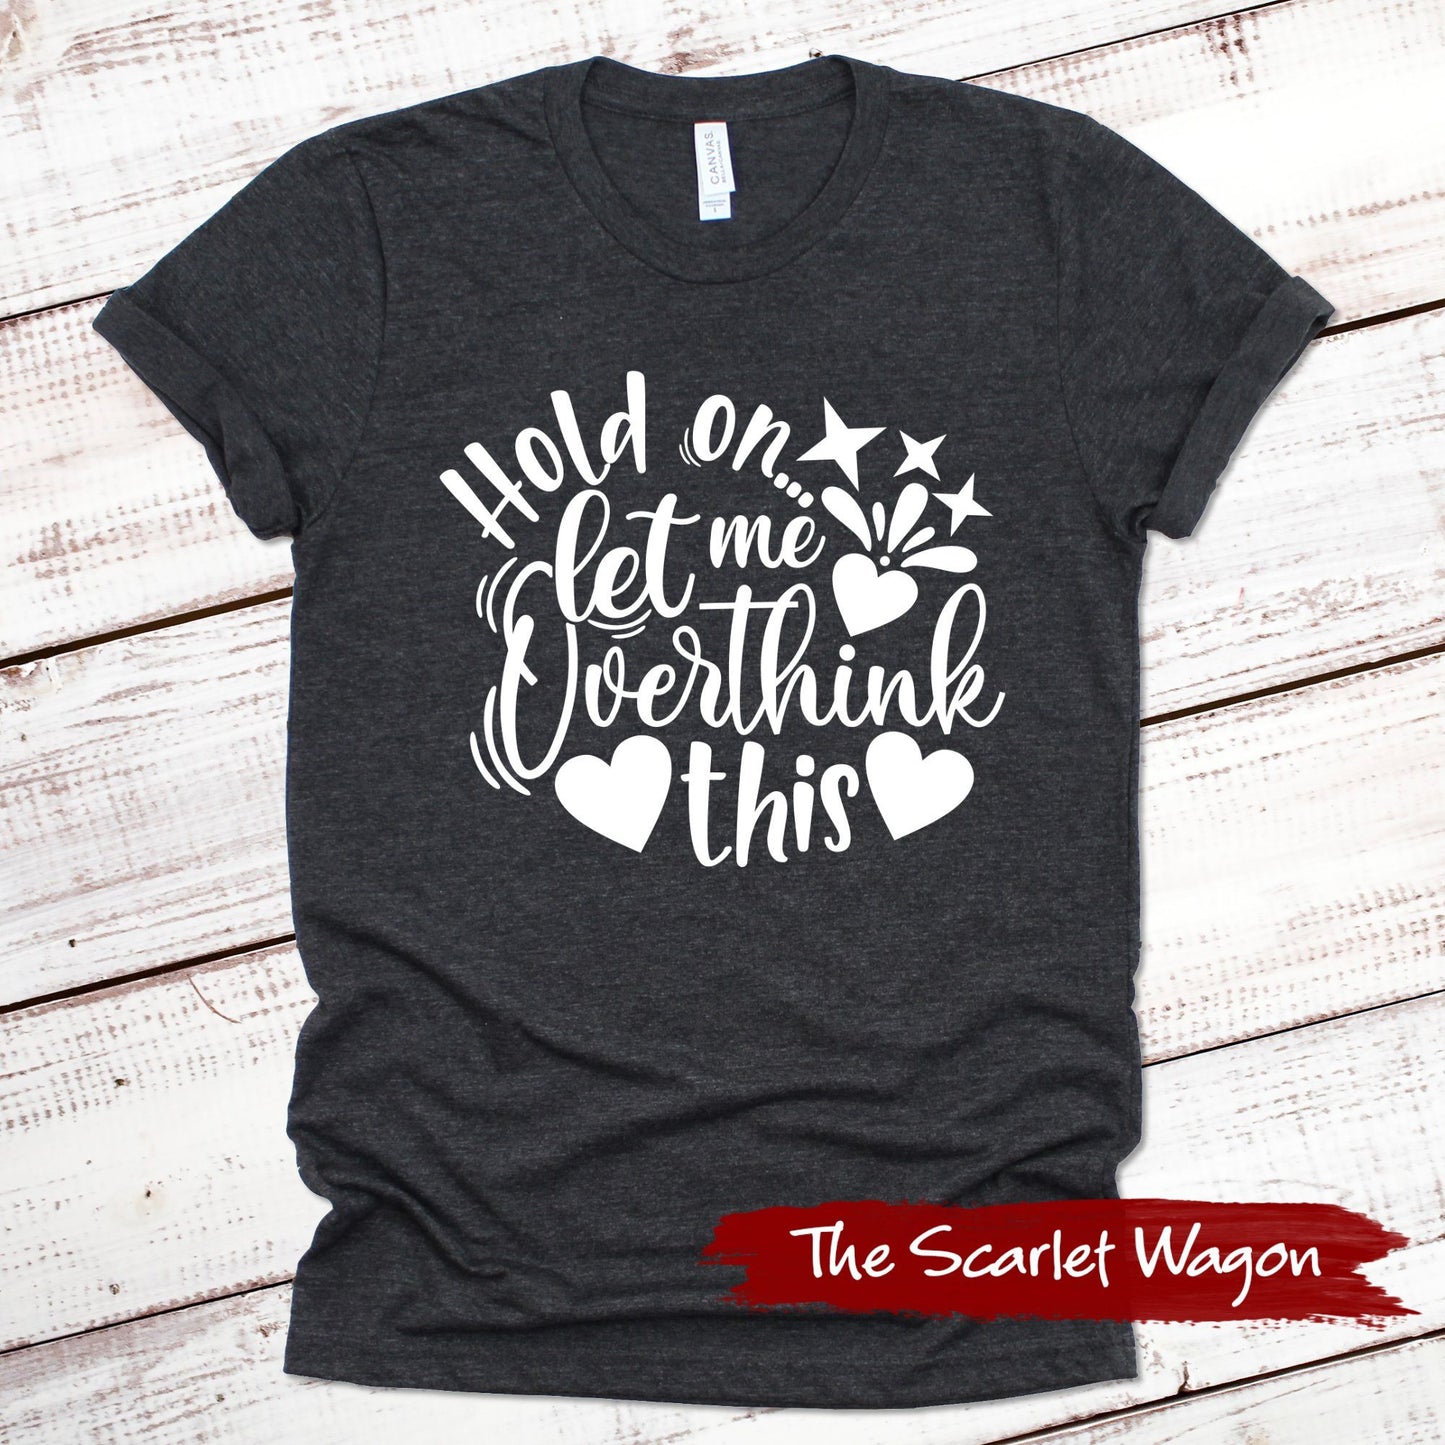 Hold On Let Me Overthink This Funny Shirt Scarlet Wagon Dark Gray Heather XS 